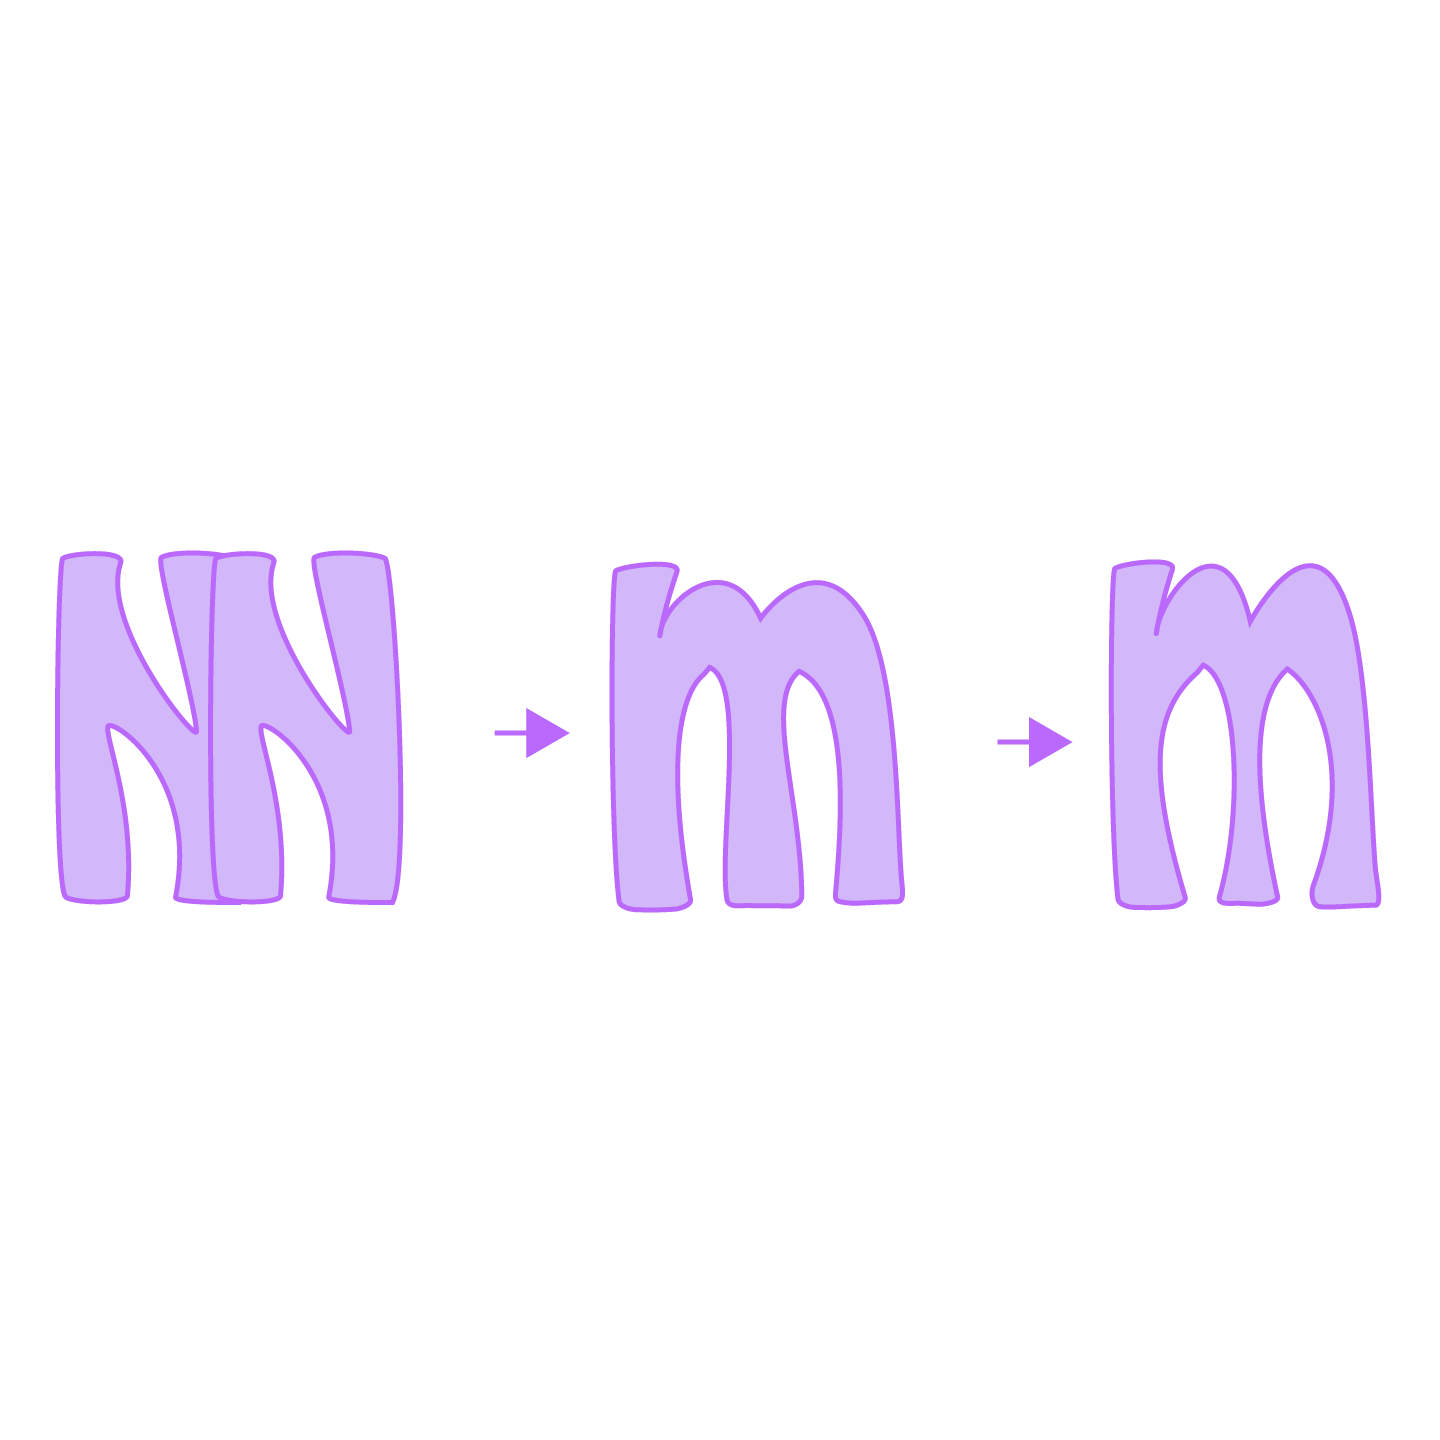 two NN’s into an M 